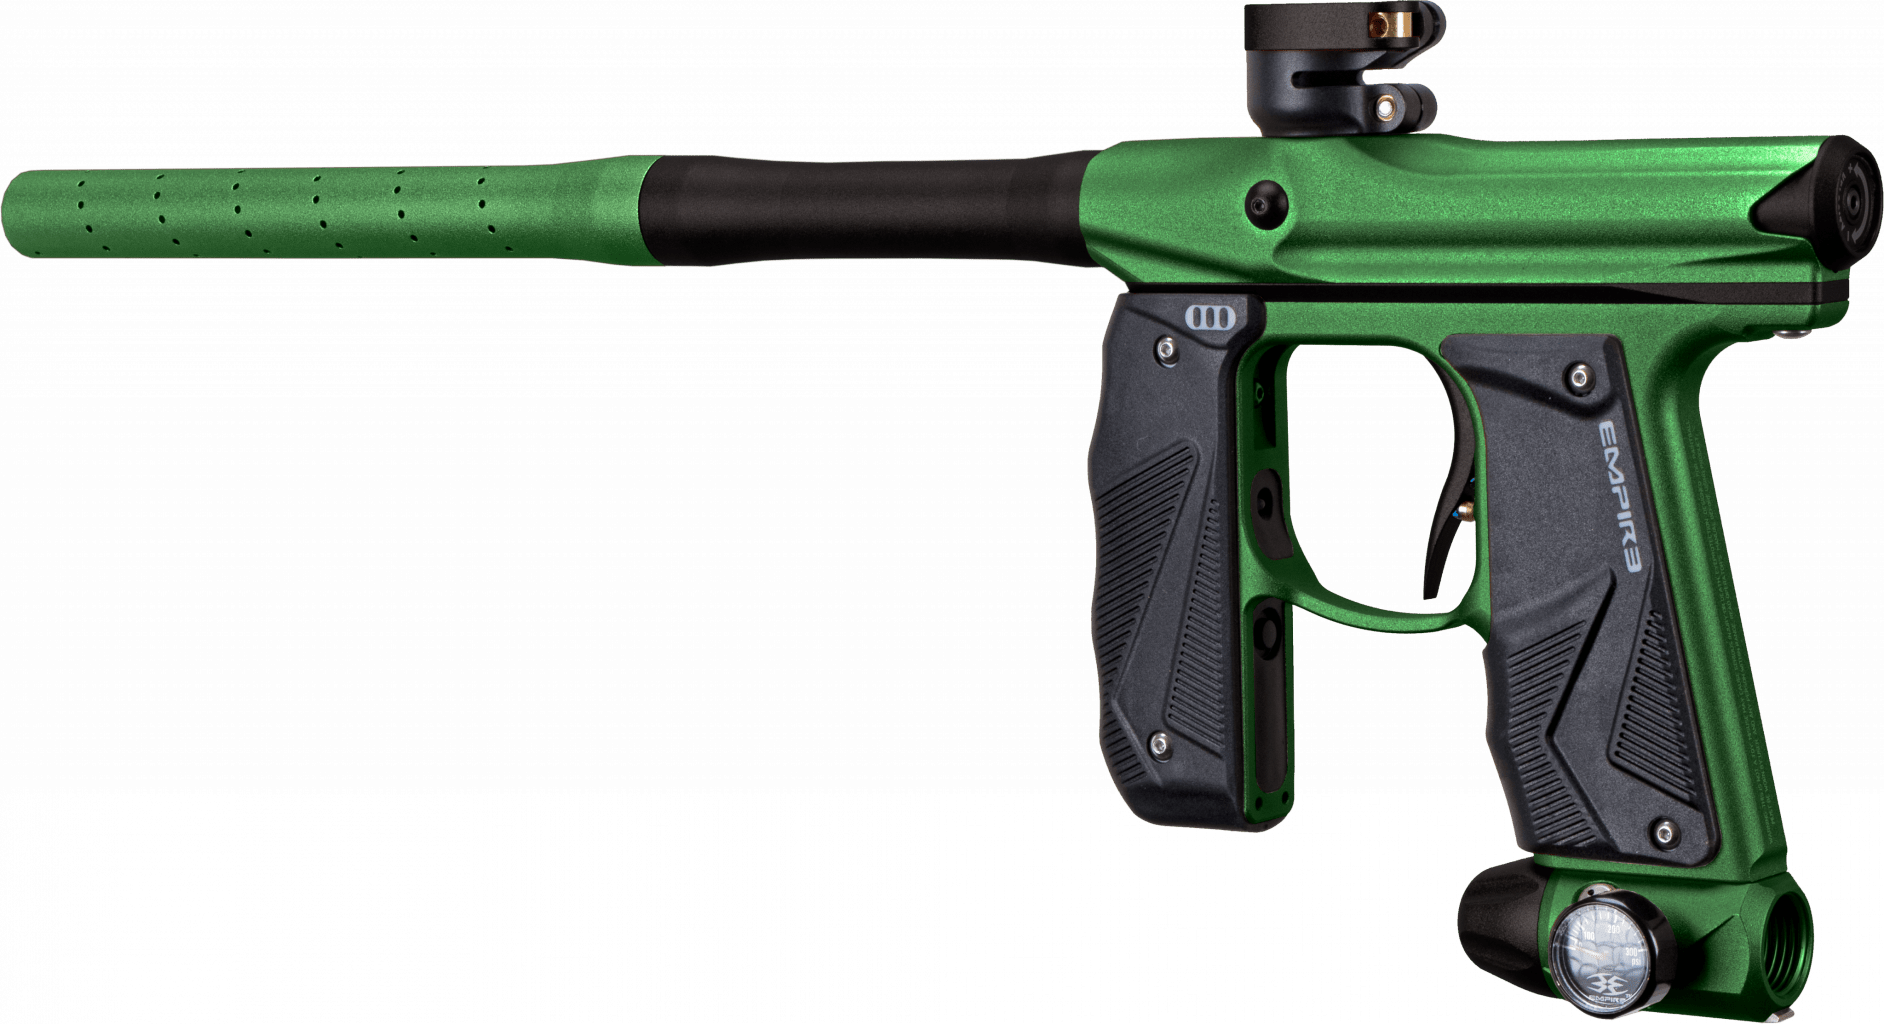 EMPIRE MINI GS PAINTBALL GUN W/ TWO PIECE BARREL- DUST GREEN/ DUST BROWN - Eminent Paintball And Airsoft